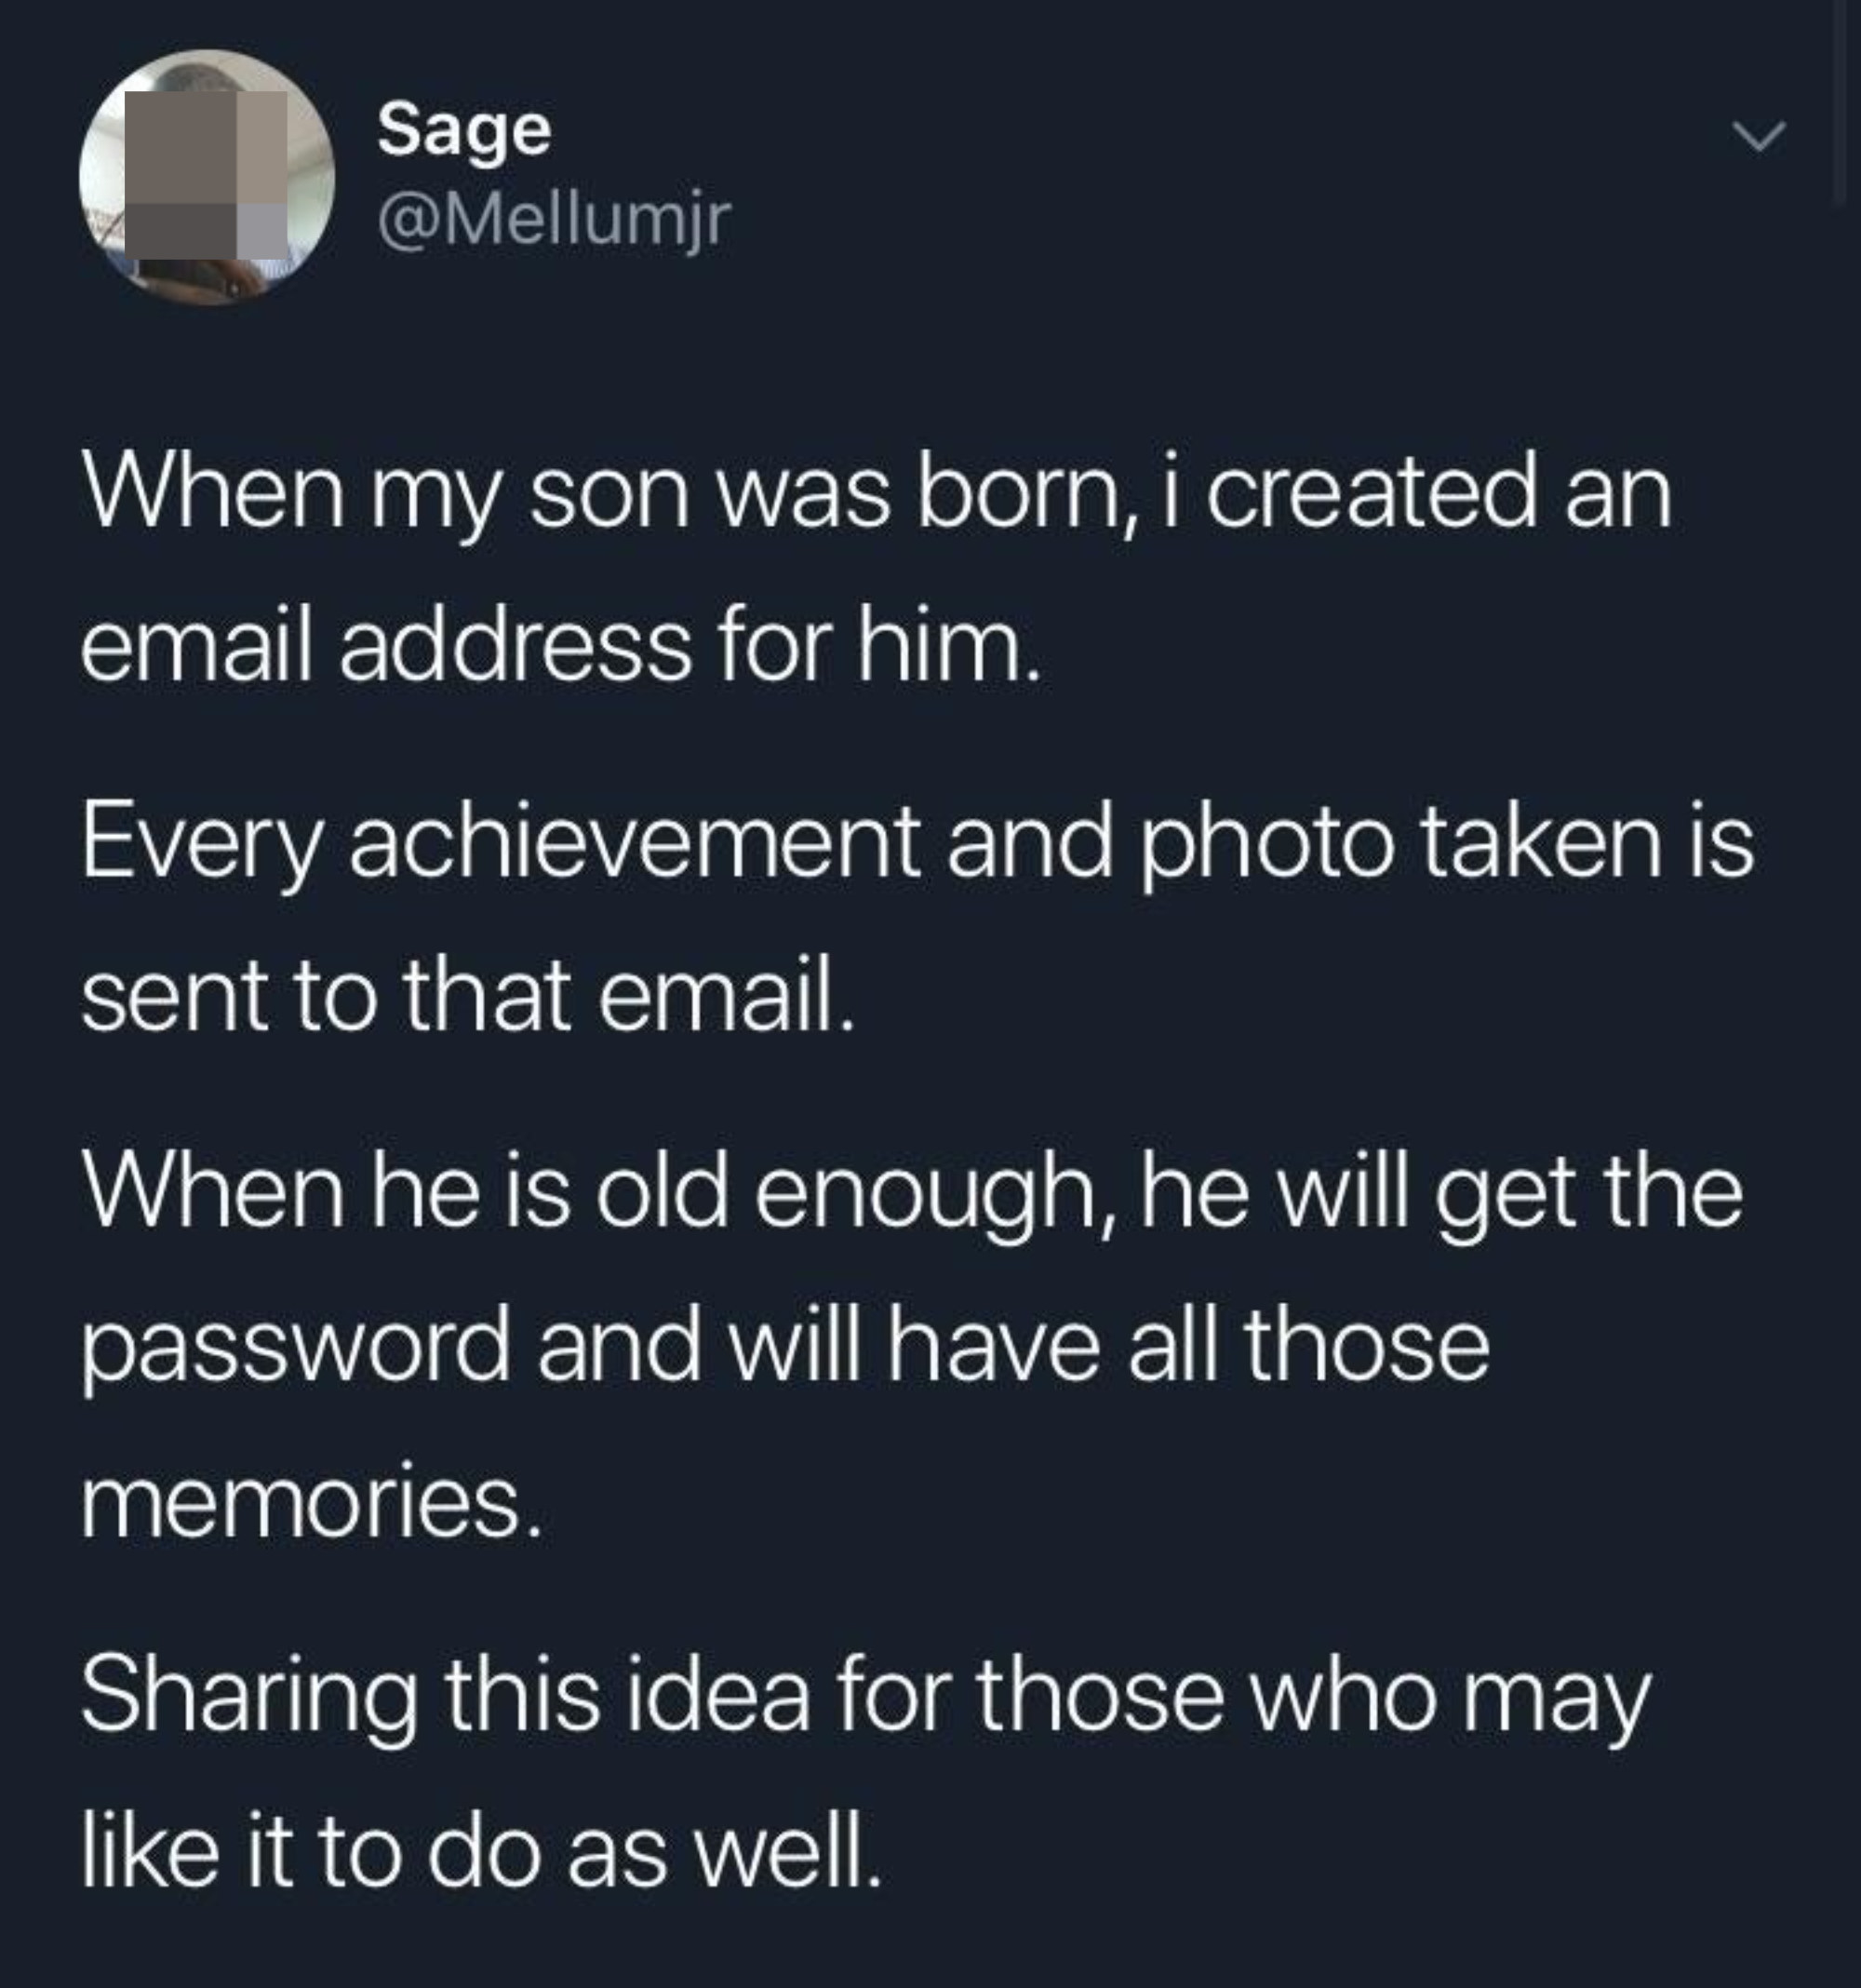 tweet reading When my son was born, i created an email address for him.
Every achievement and photo taken is sent to that email.

When he is old enough, he will get the password and will have all those memories.